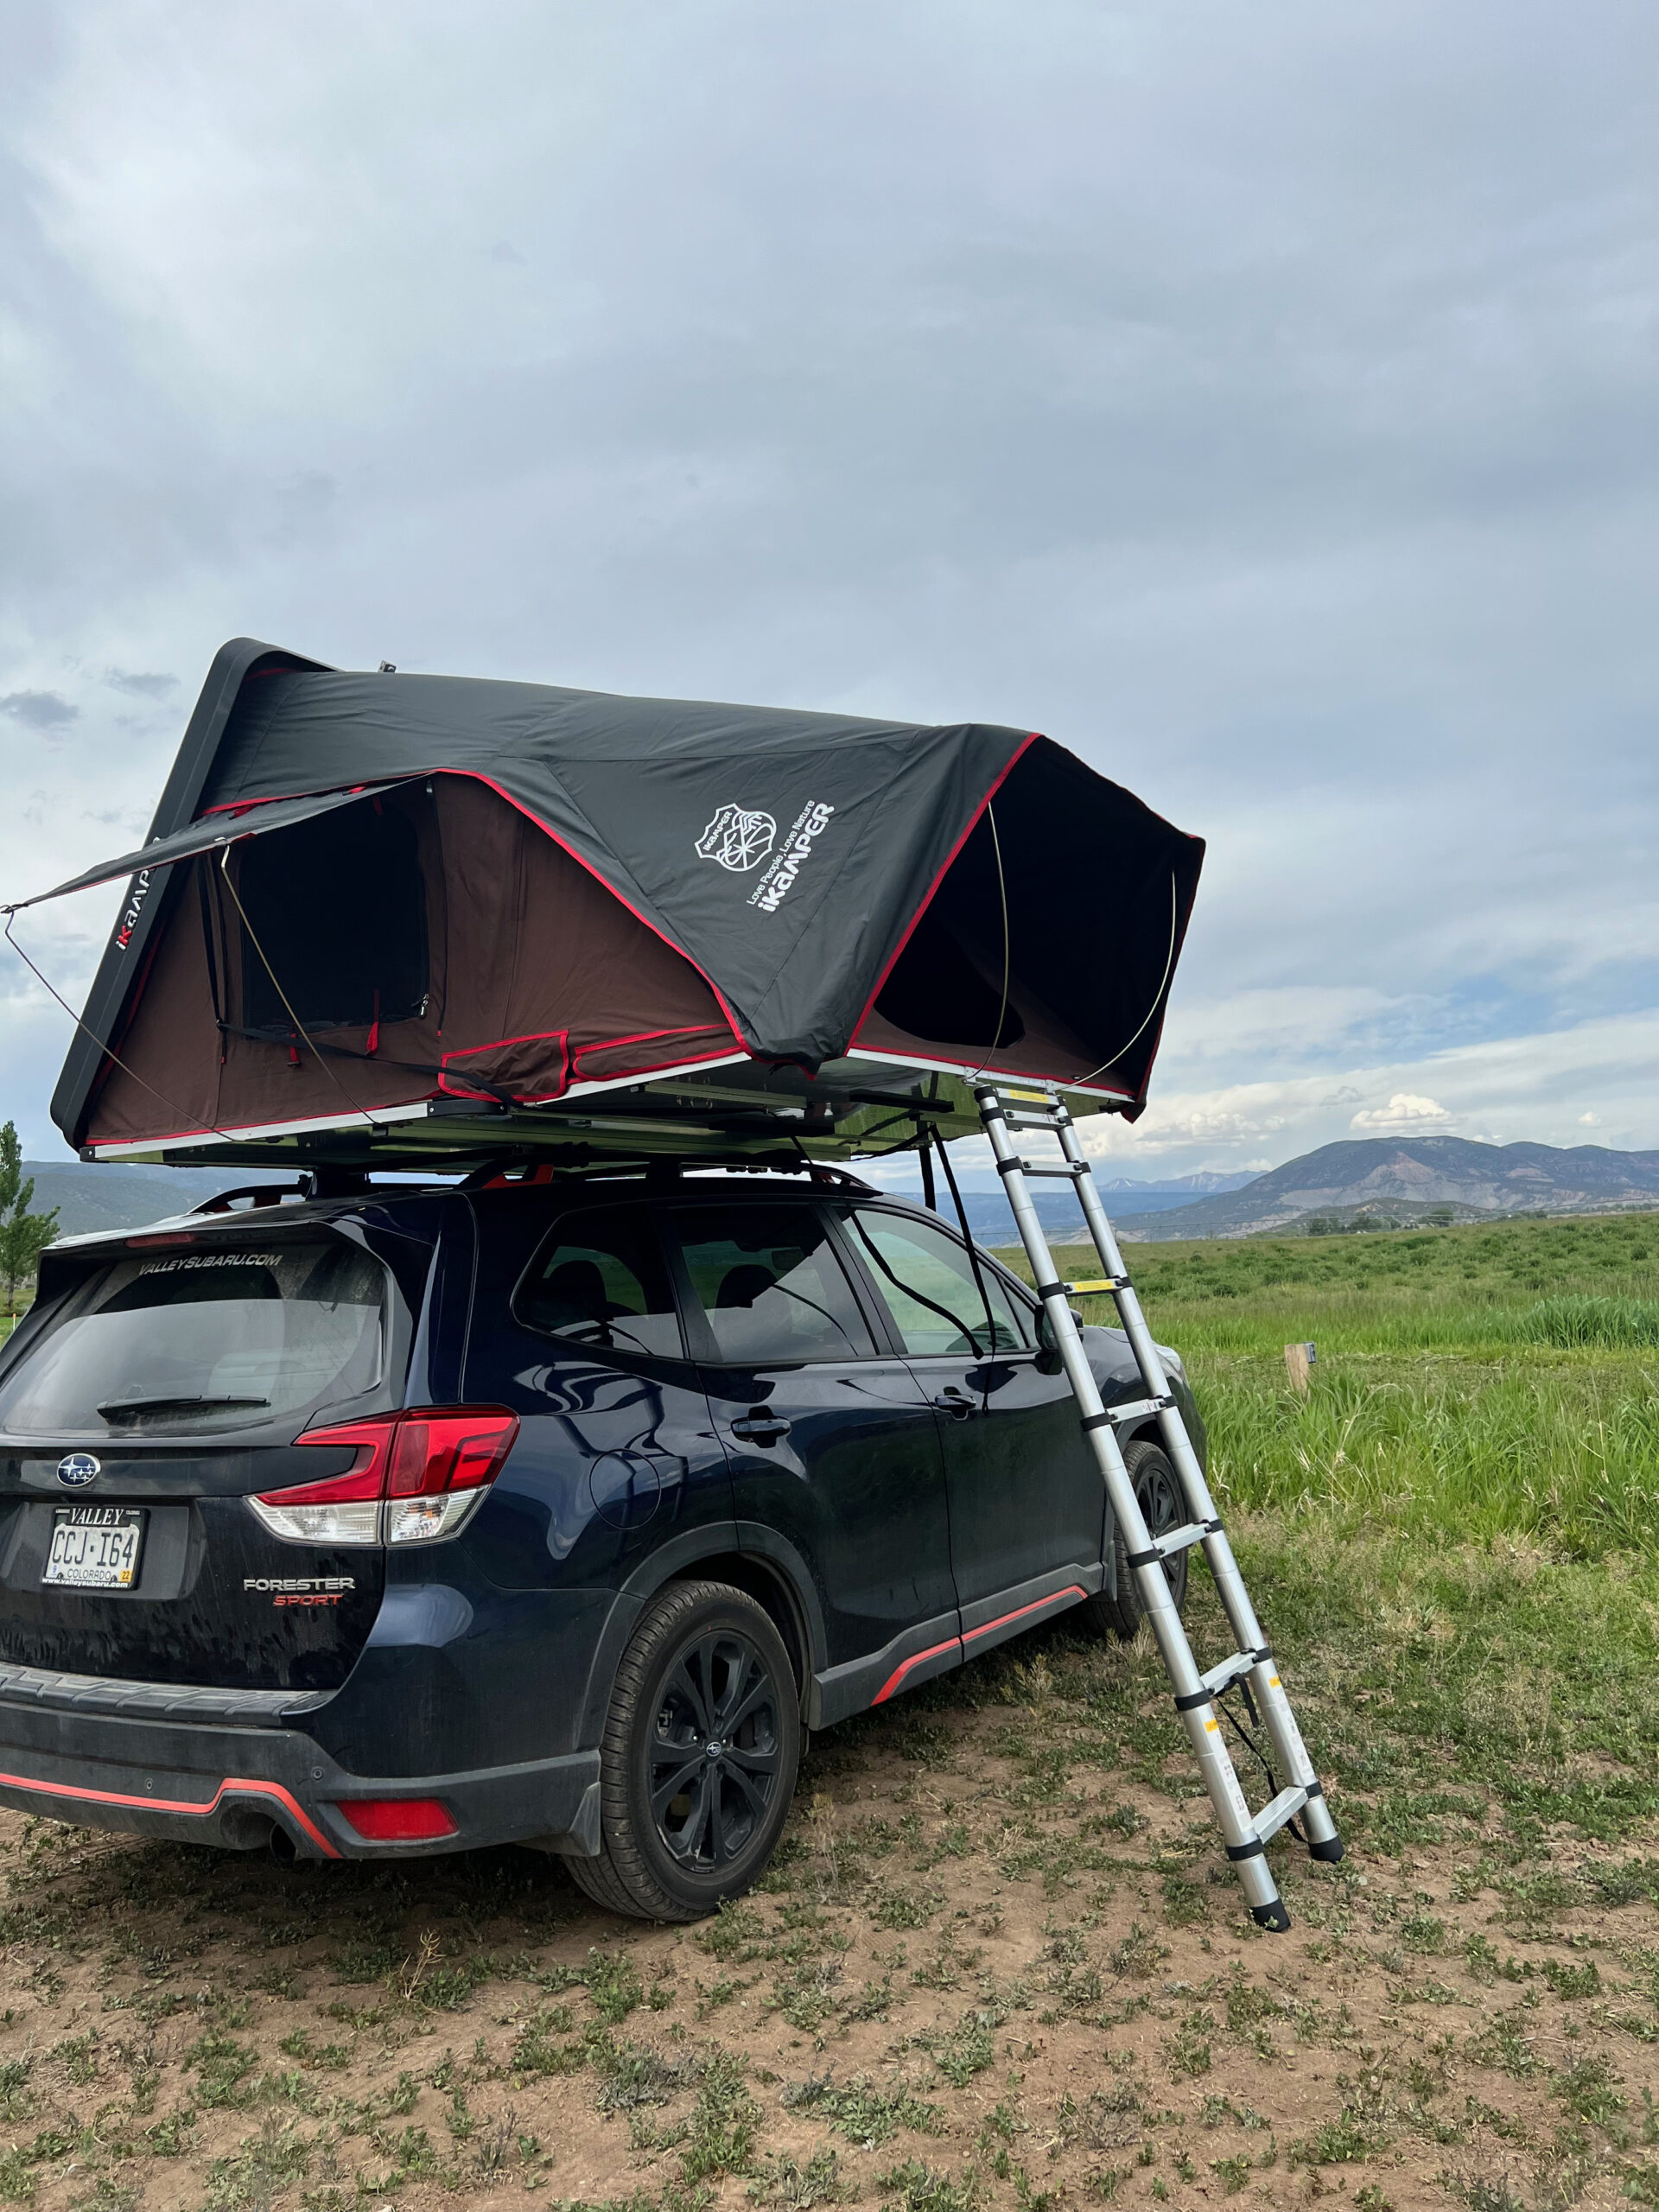 The author tested the Skycamp 2.0 at multiple Colorado camp sites.